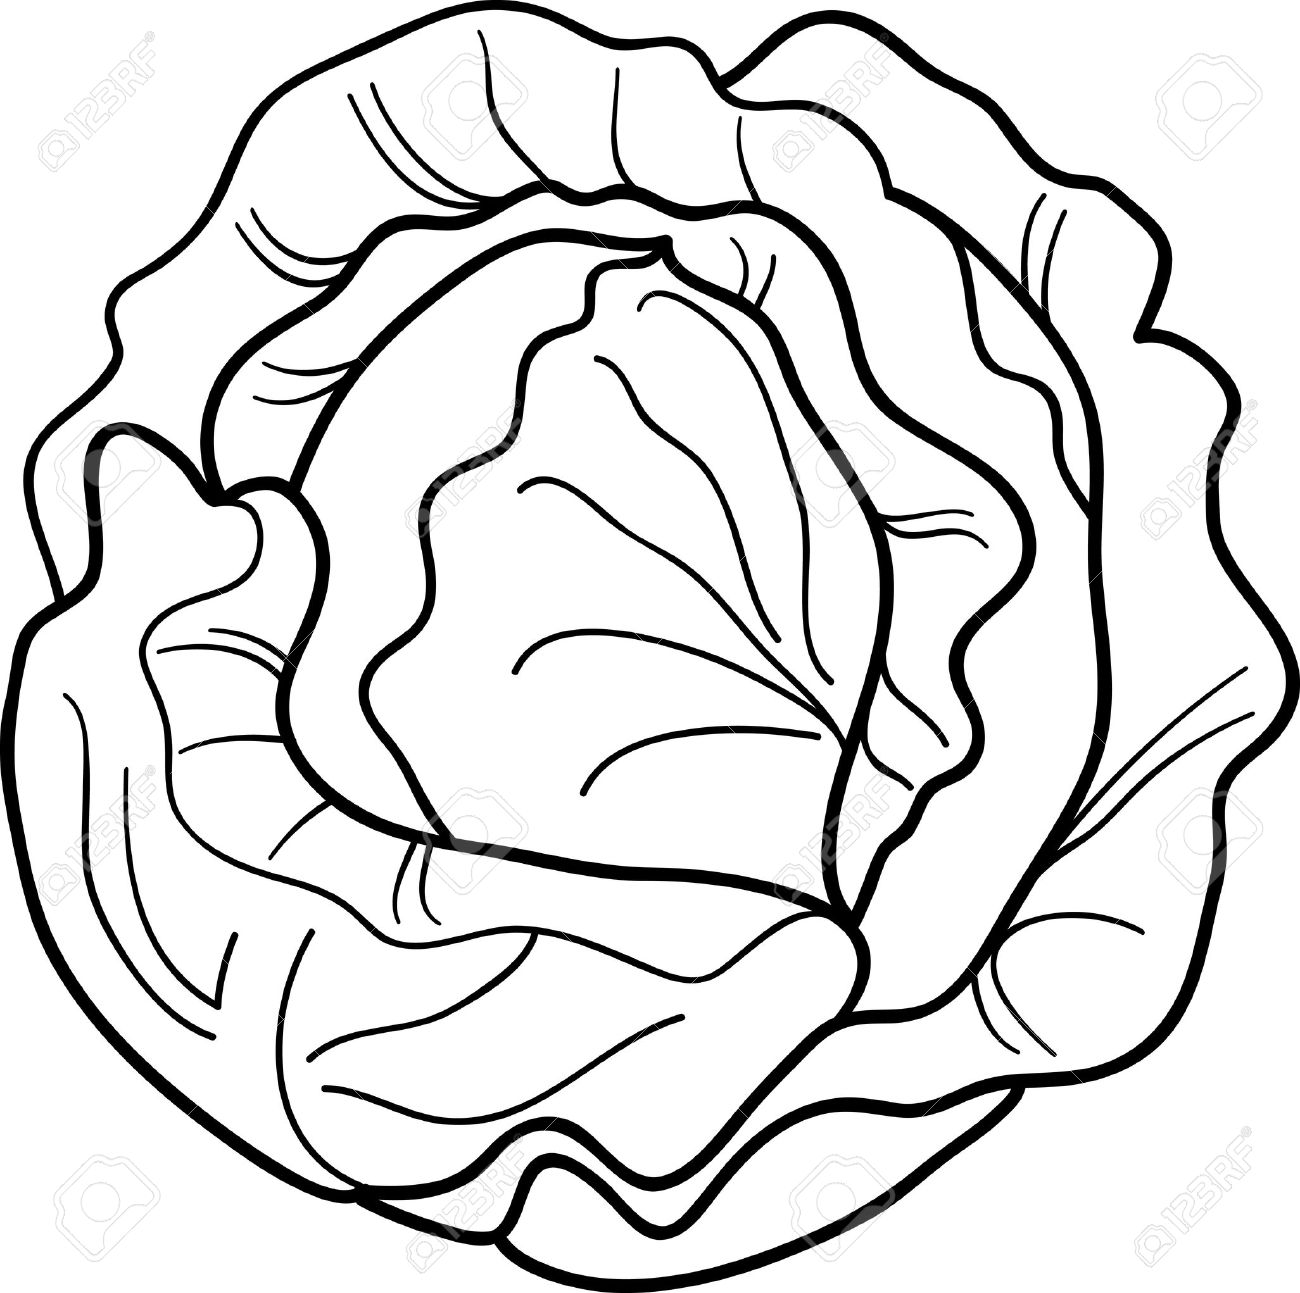 18869114-black-and-white-cartoon-illustration-of-cabbage-or-lettuce-for-coloring-book  | ESL Orange Tree